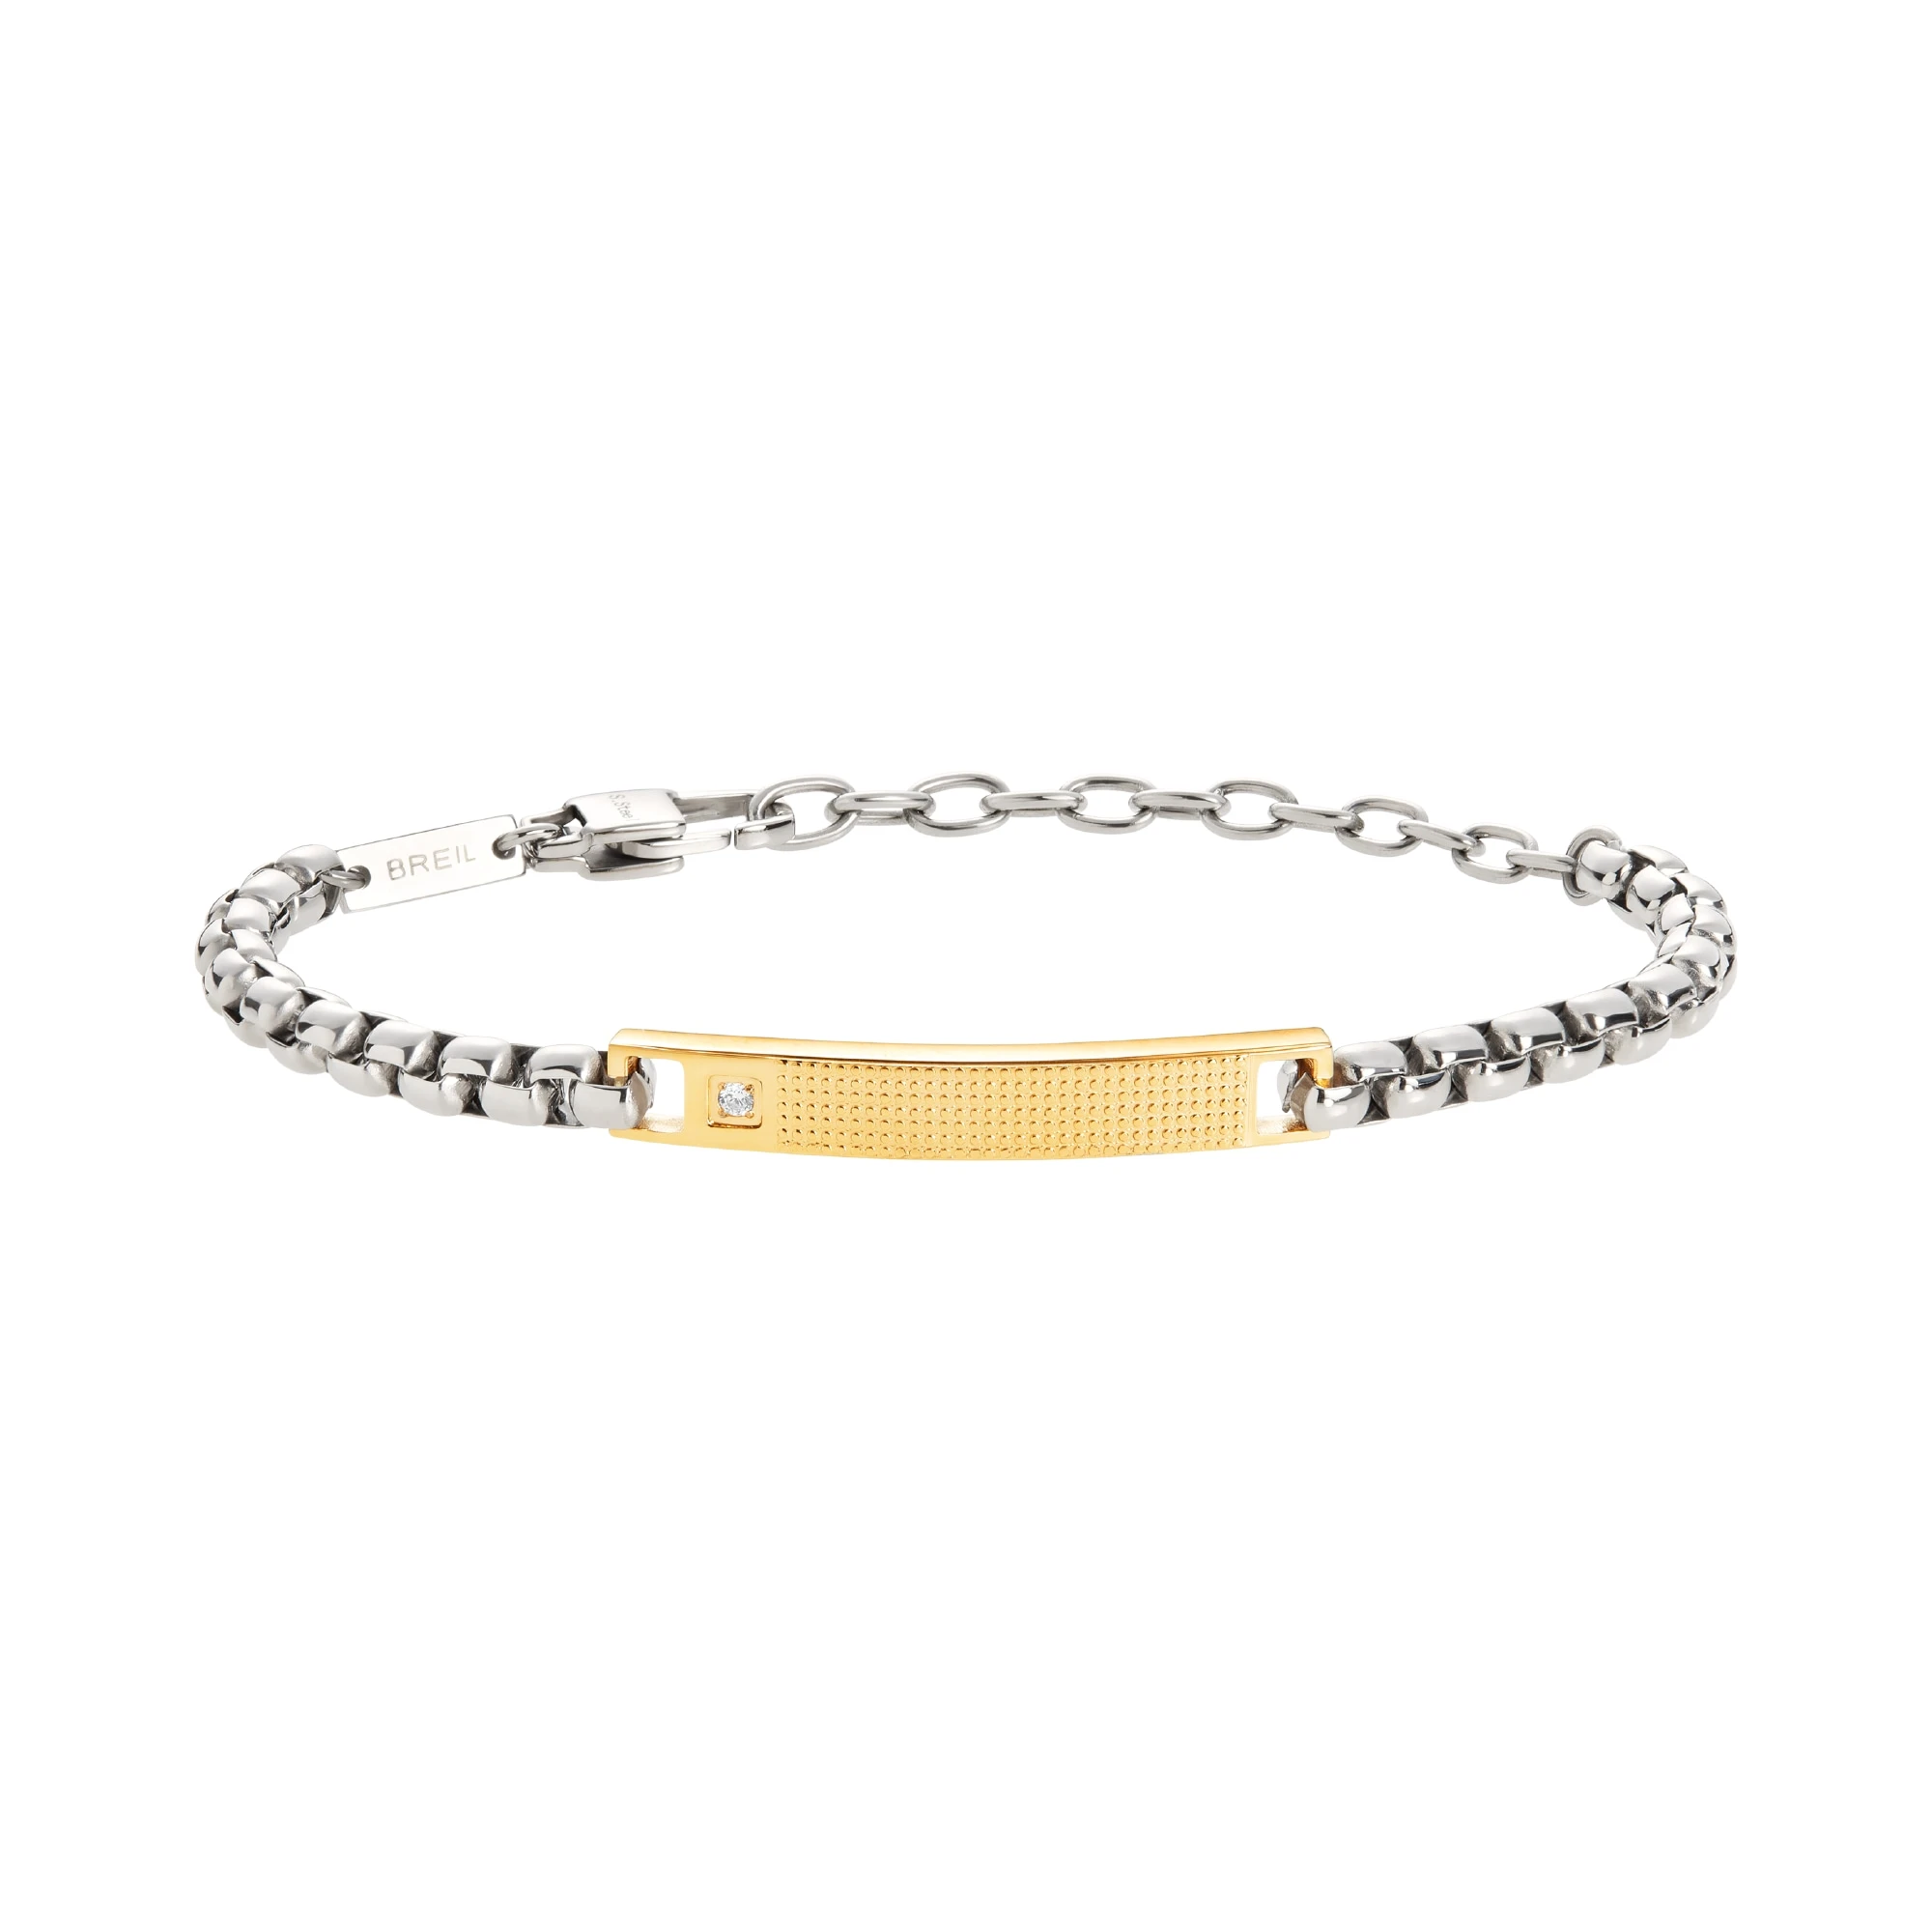 TAG AND CROSS - TWO-COLOR STEEL BRACELET WITH CUBIC ZIRCONIA - 1 - TJ3225 | Breil